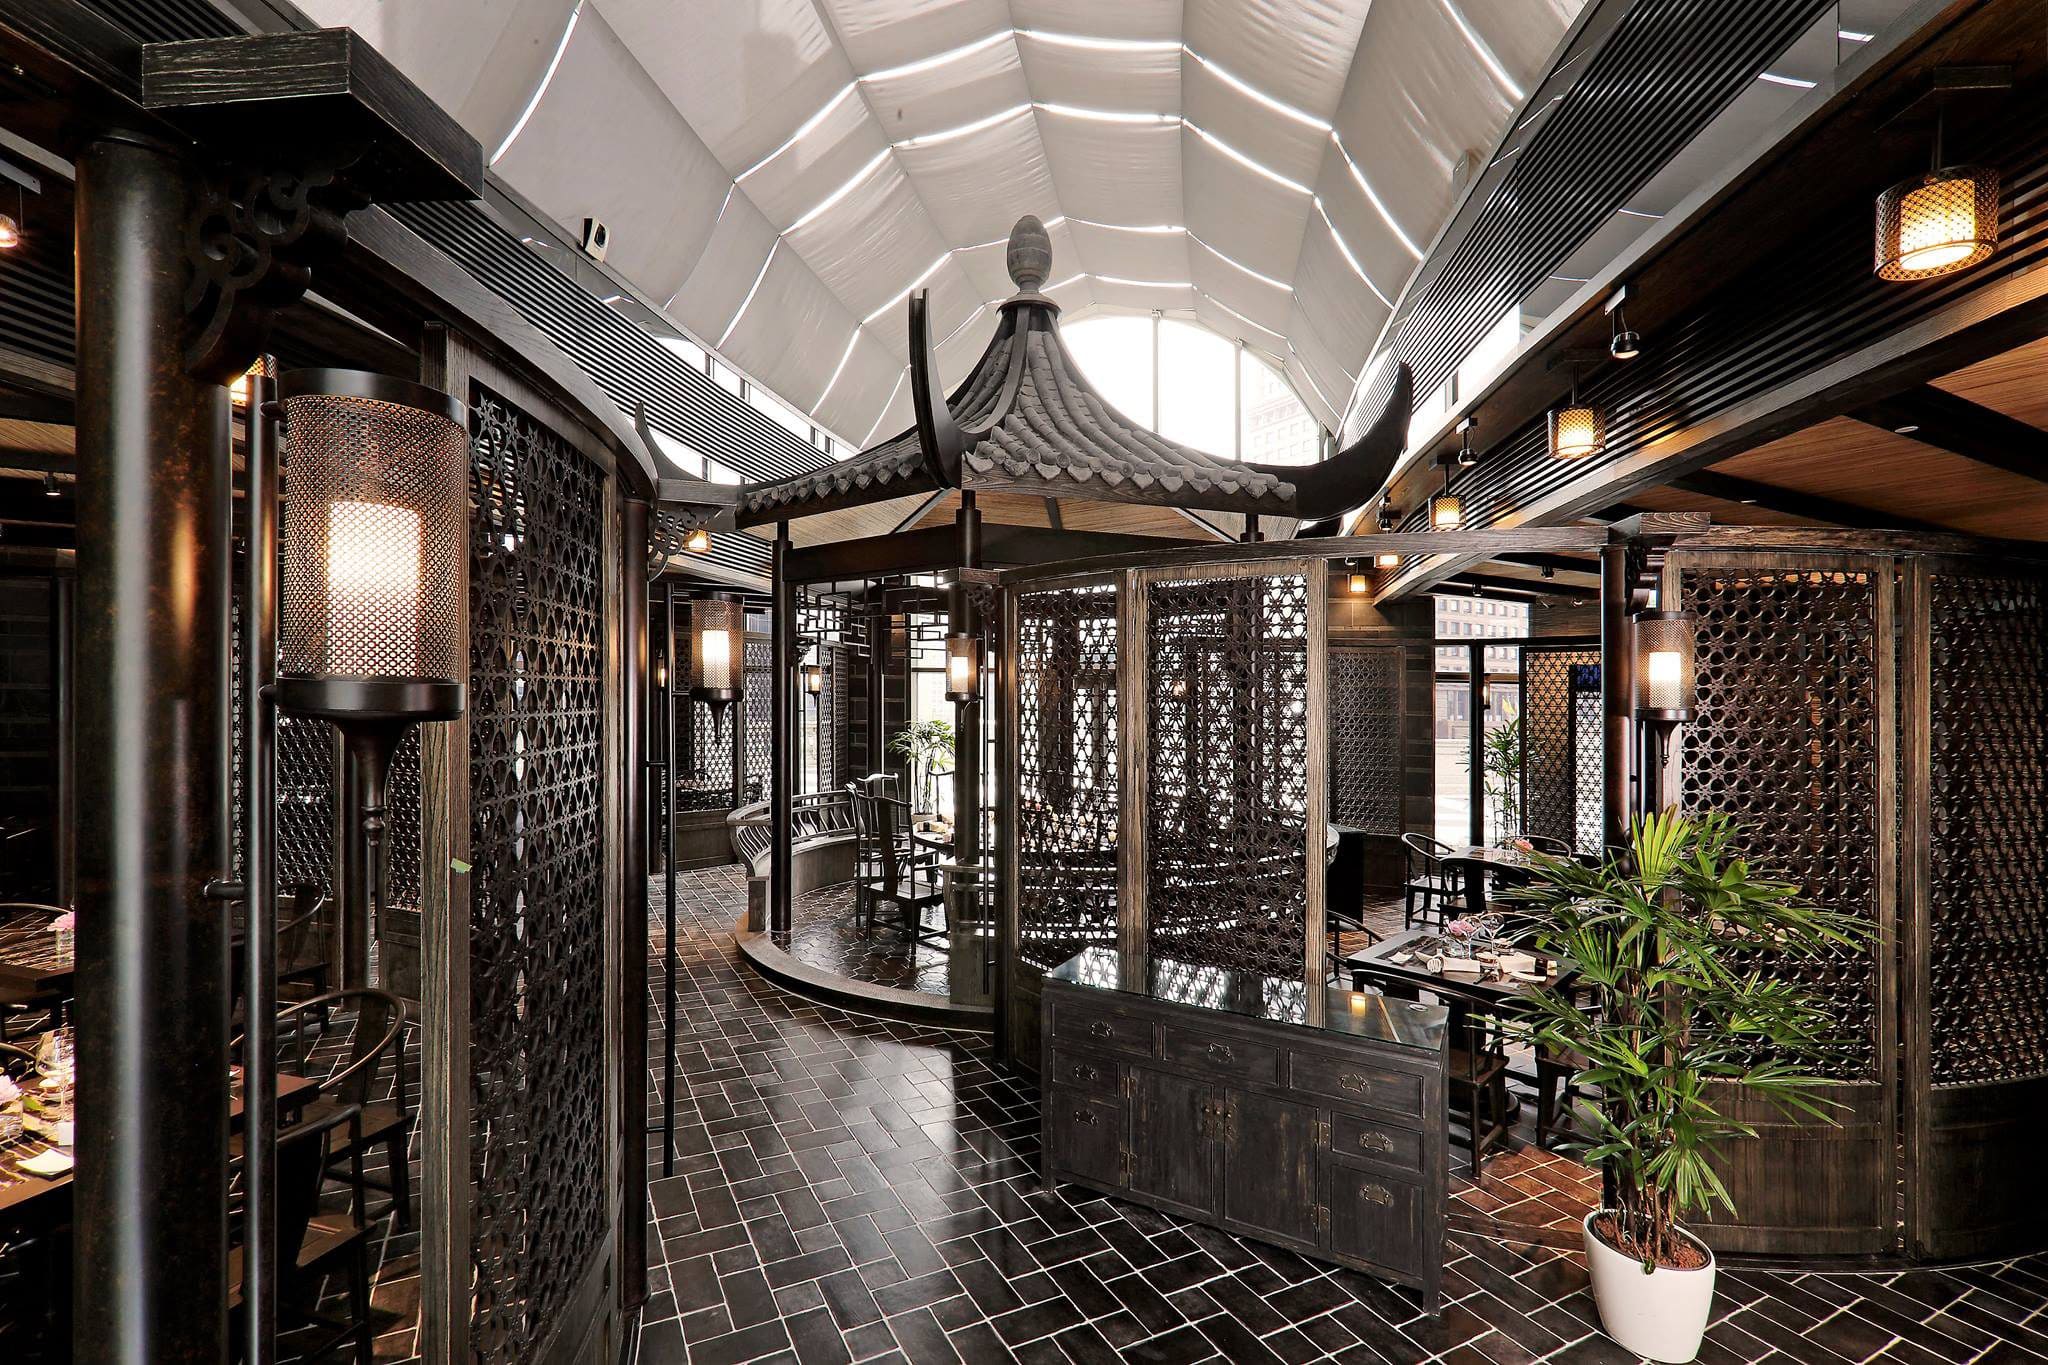 Dining area inspired by the royal garden from the Qing dynasty at Family Li Imperial Cuisine